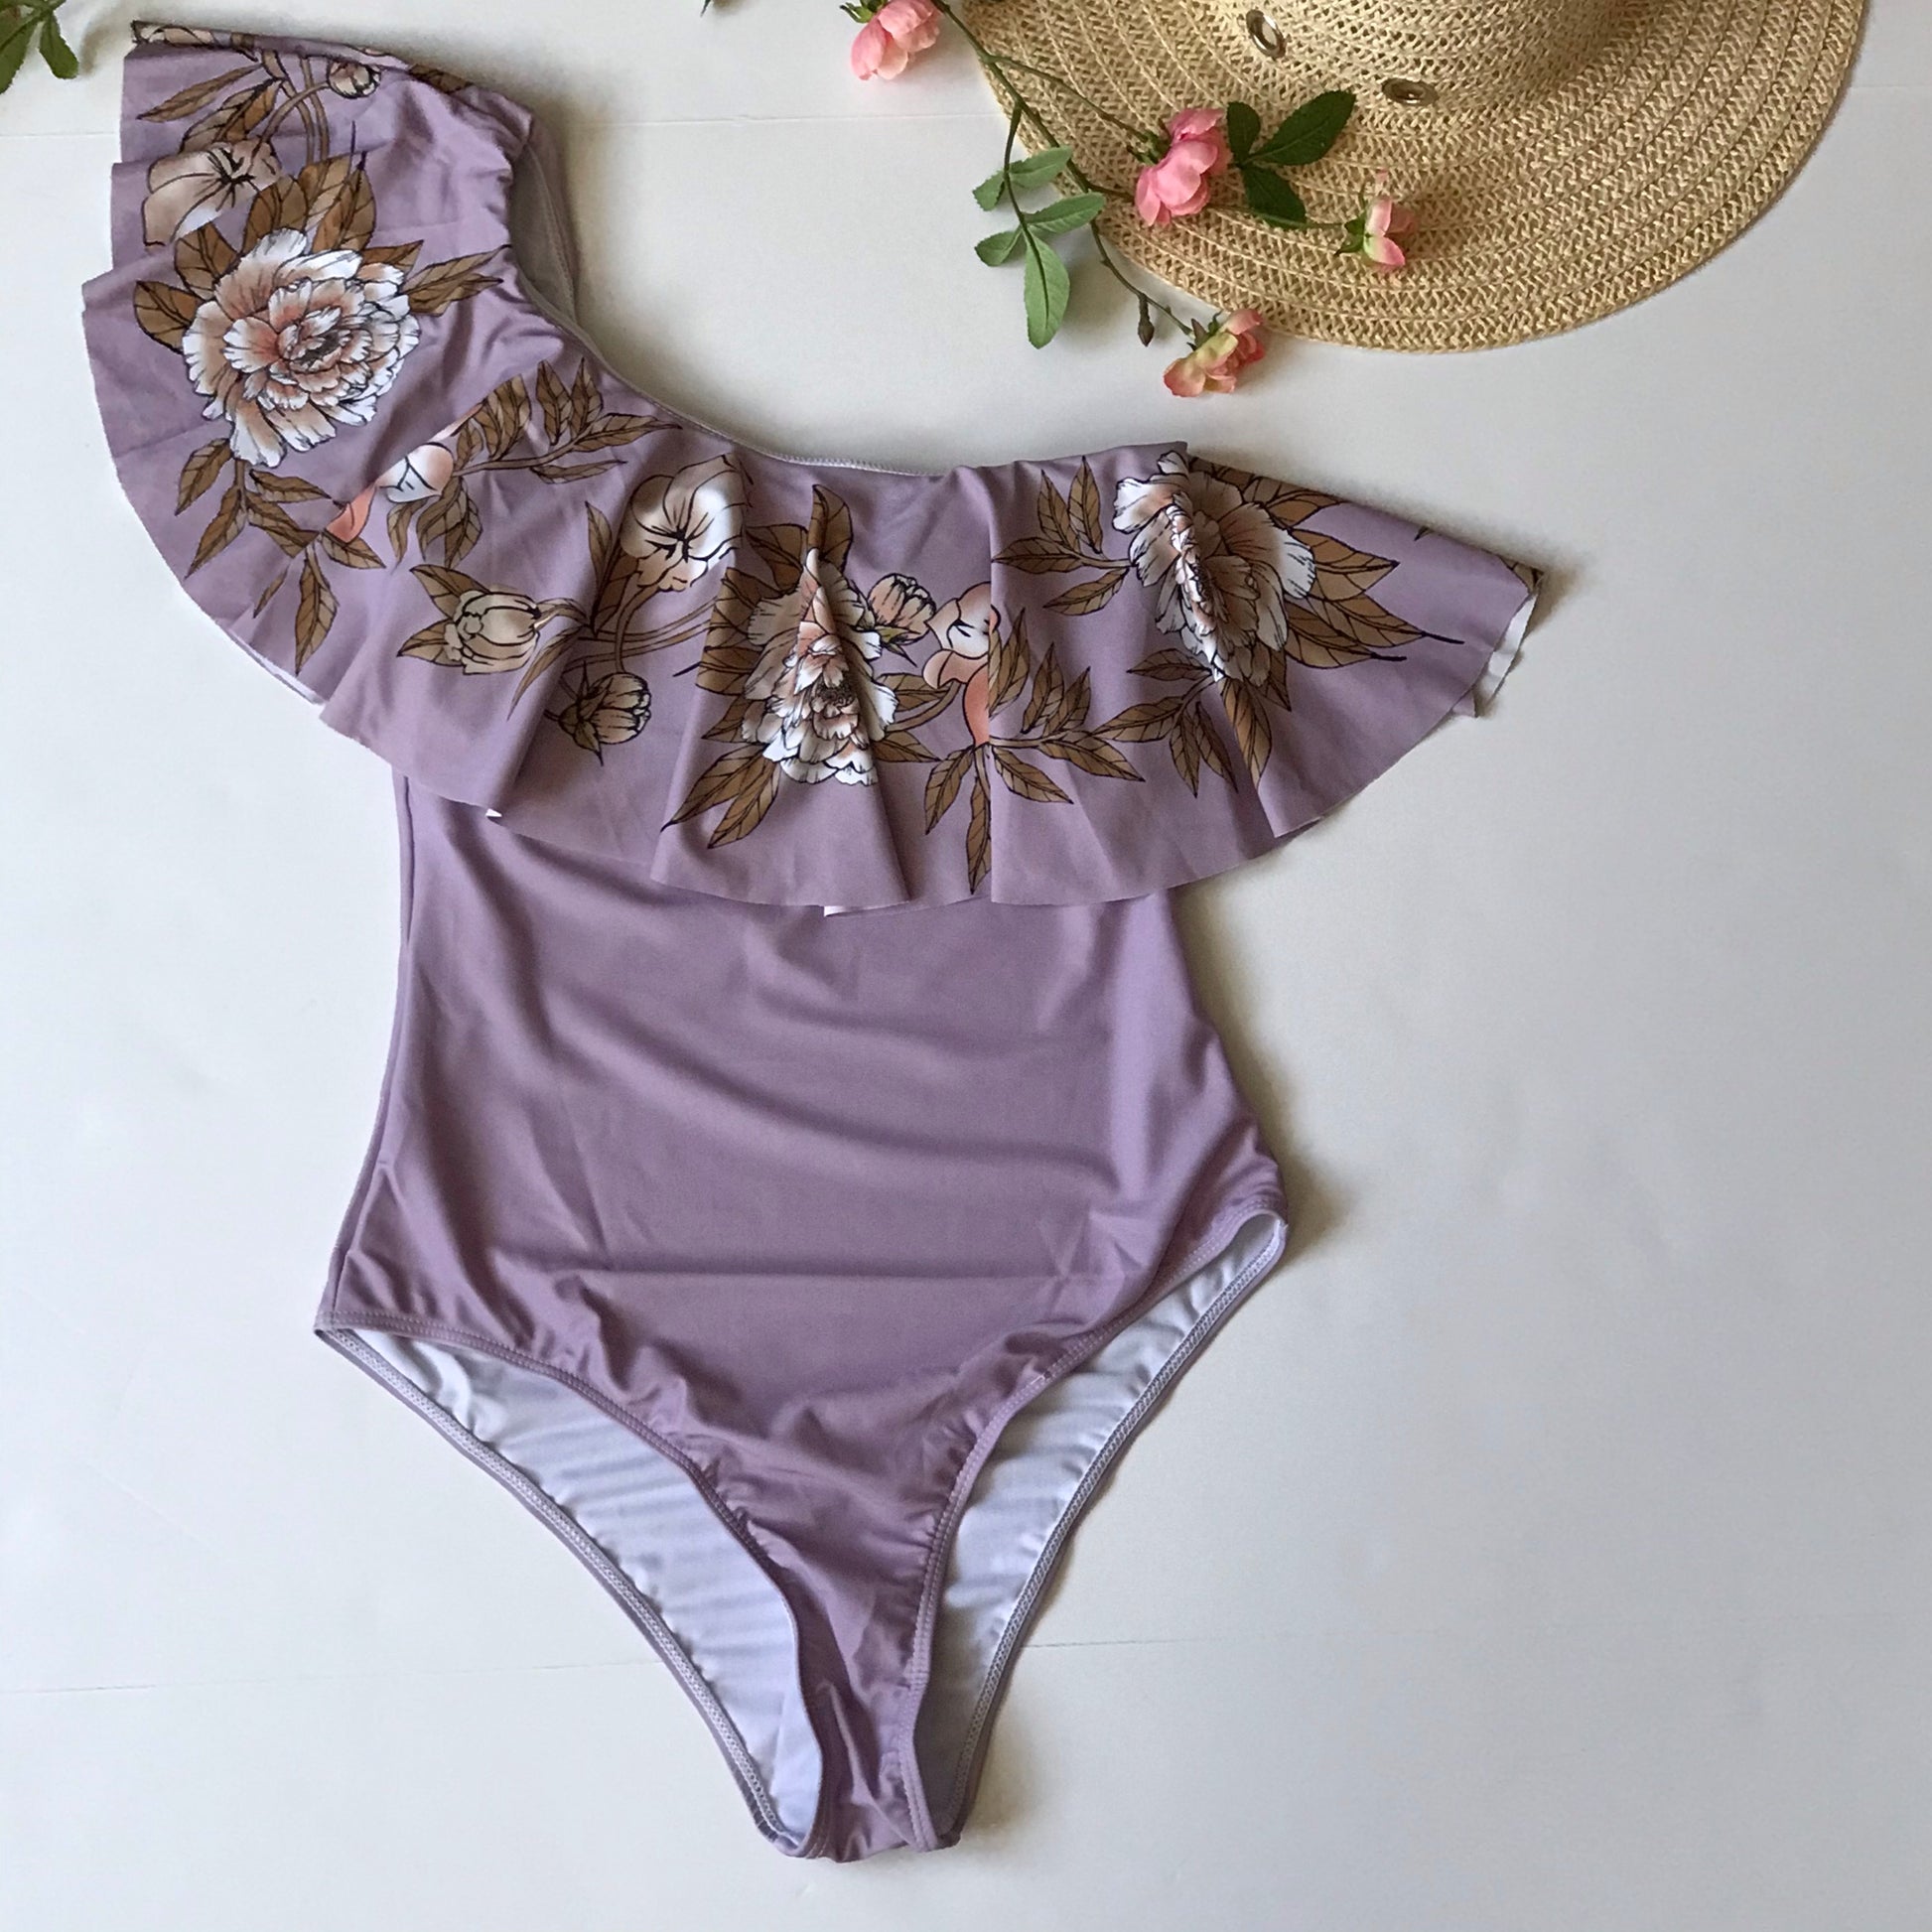 one piece off shoulder ruffled floral swimsuit - The Lotus Wave 